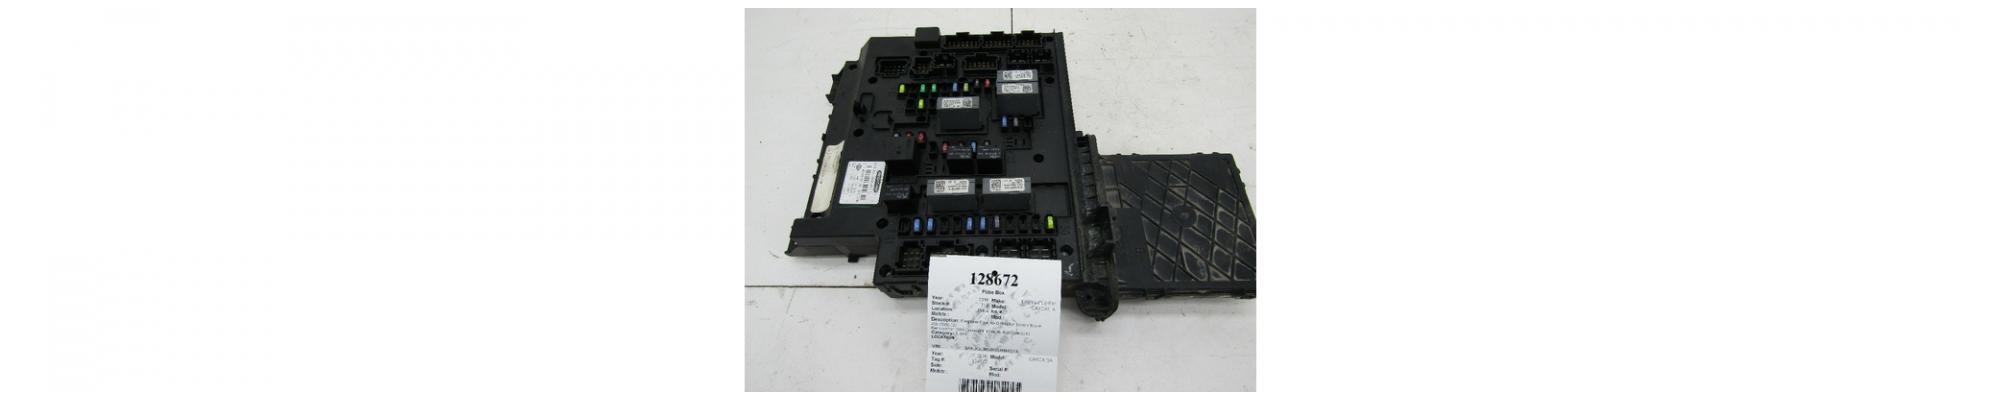 Freightliner Cascadia Fuse Box Oem A0675980003 In Owensboro Ky 128672